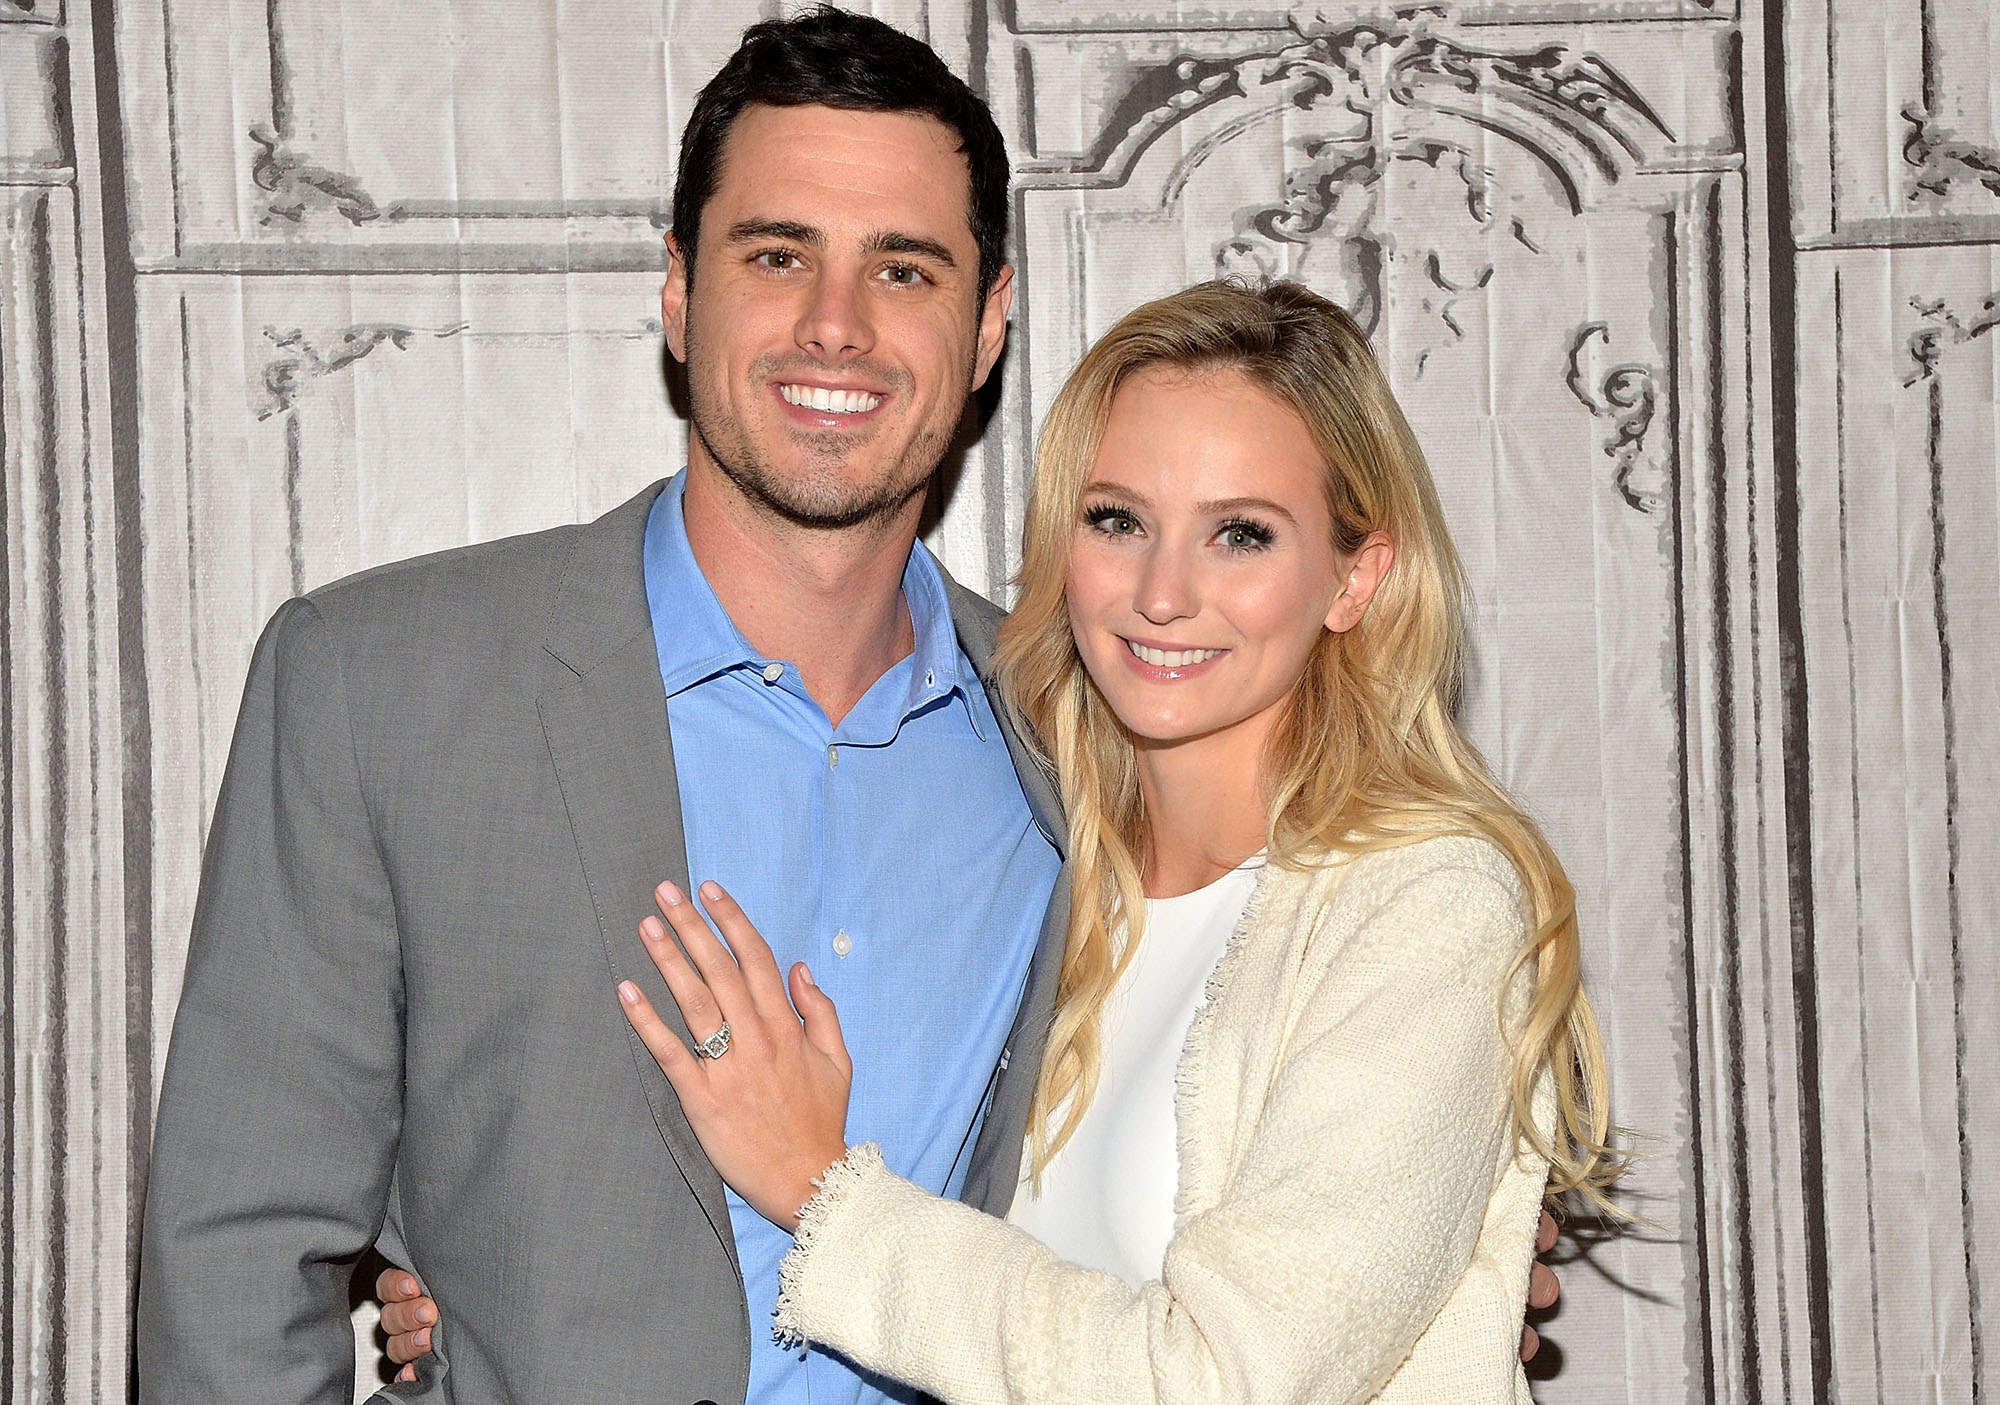 NEW YORK, NY - MARCH 15:  Bachelor Ben Higgins and Lauren Bushnell (Photo by Slaven Vlasic/Getty Images) (Slaven Vlasic&mdash;Getty Images)